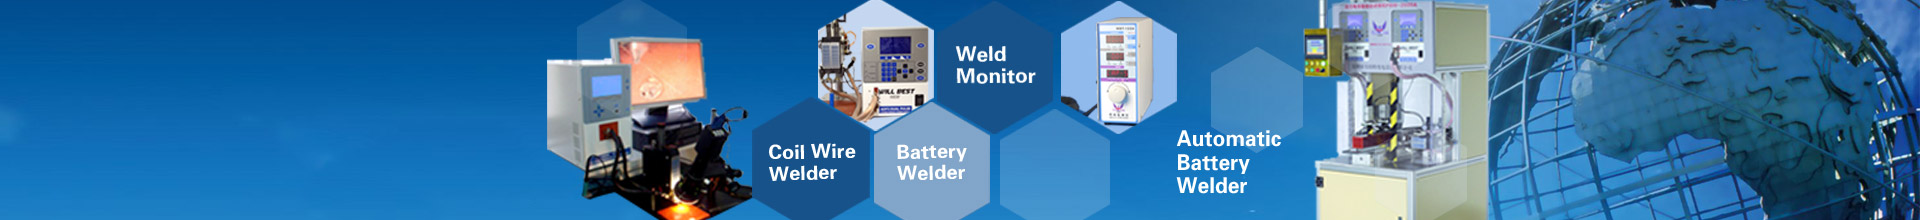 Weld Checker & Monitor and Welding Parts